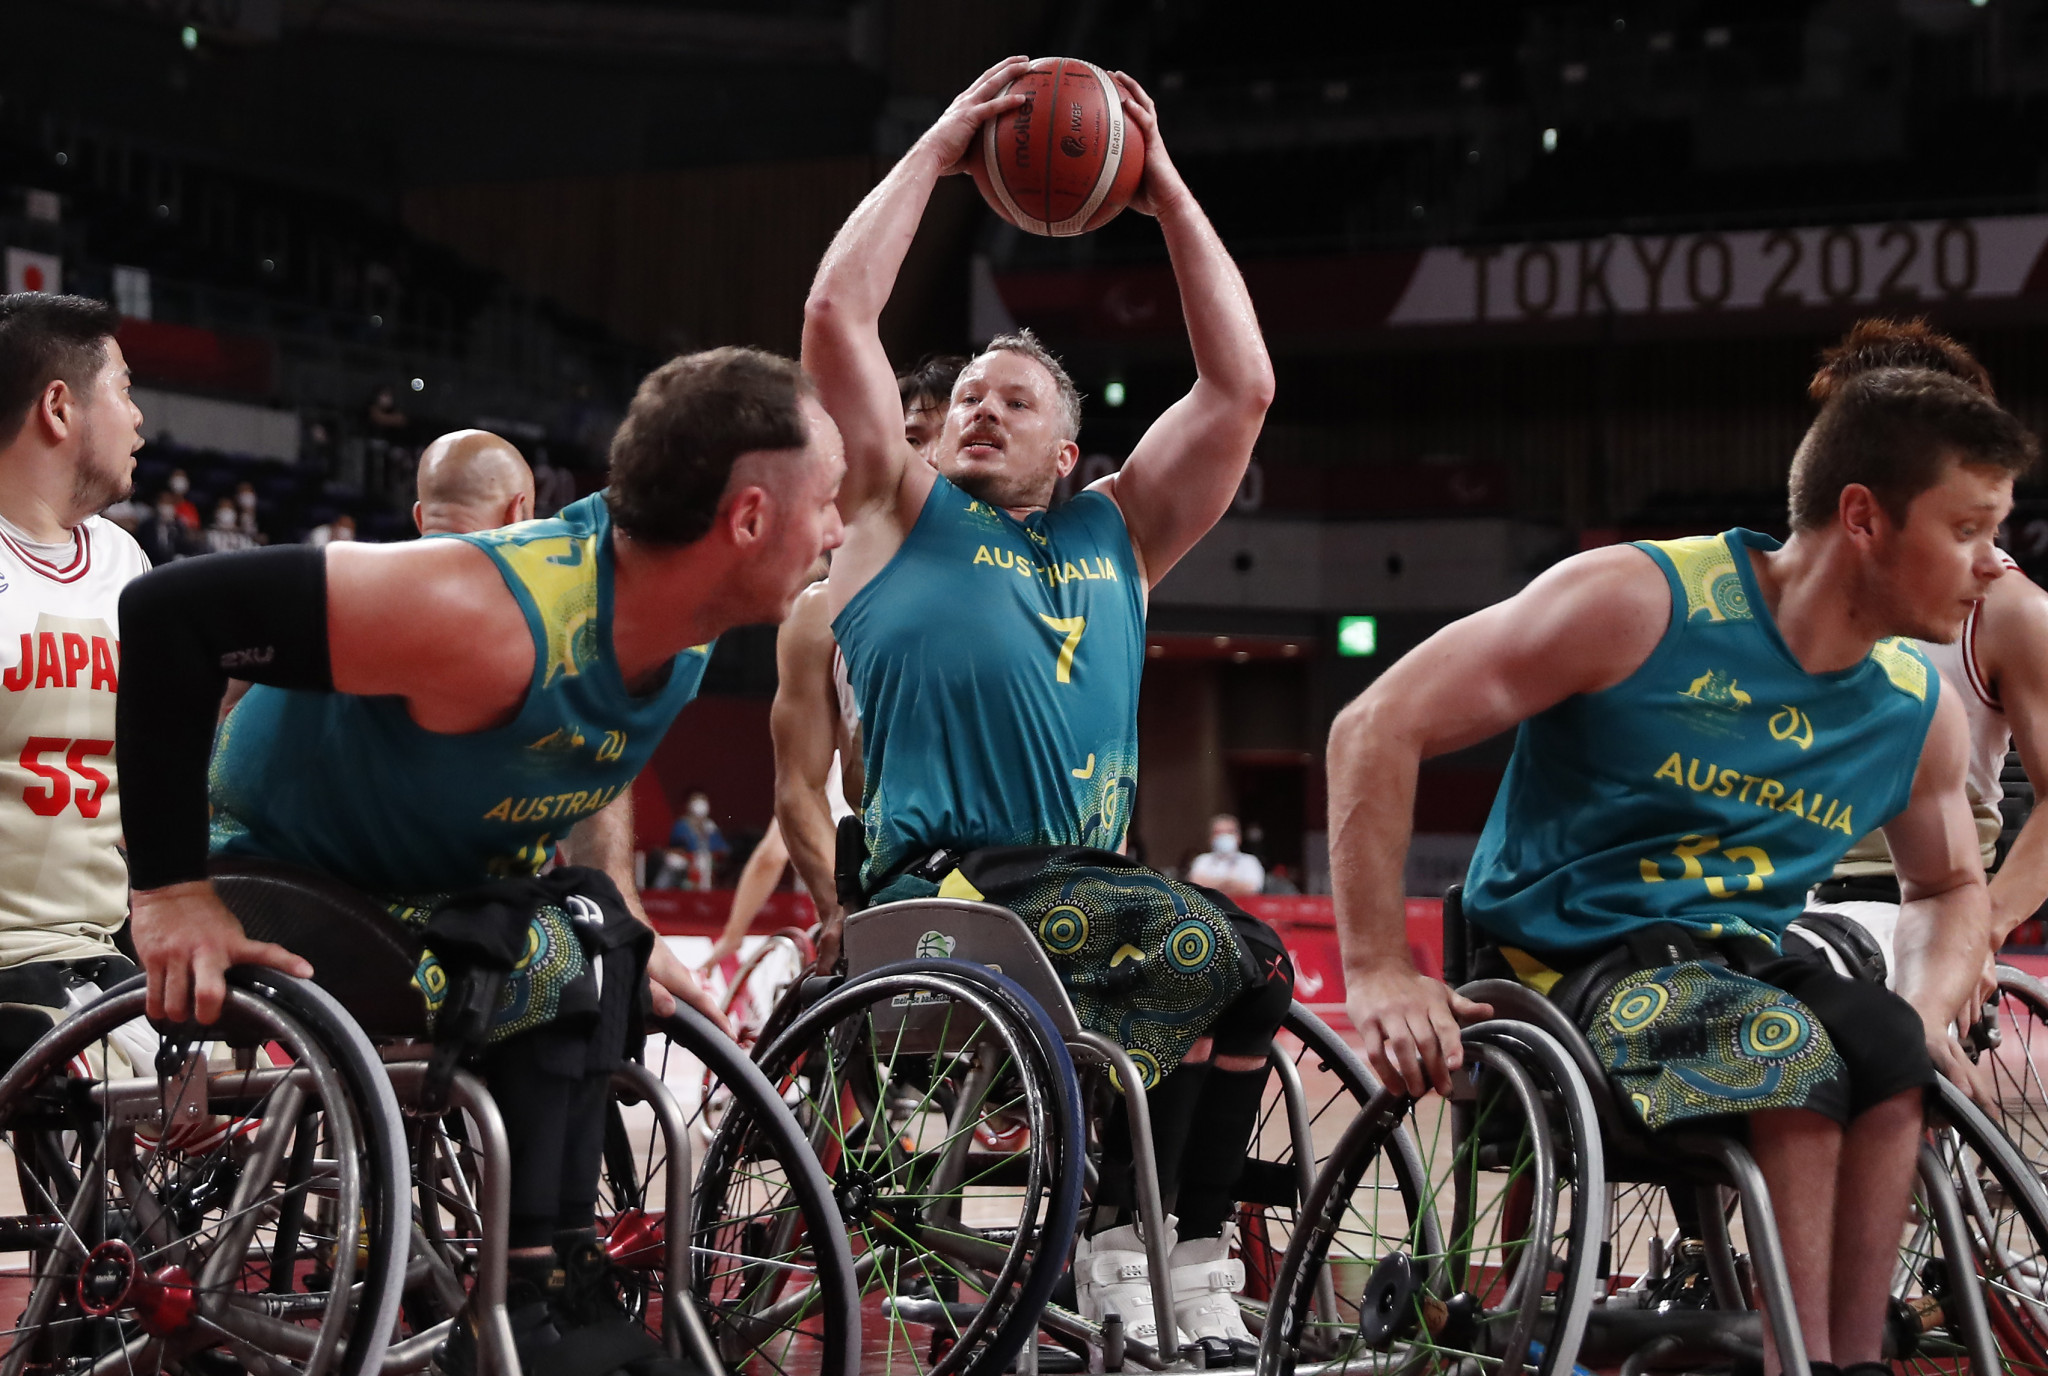 IWBF thanks organisers for efforts to stage Asia Oceania Championships amid COVID-19 challenge